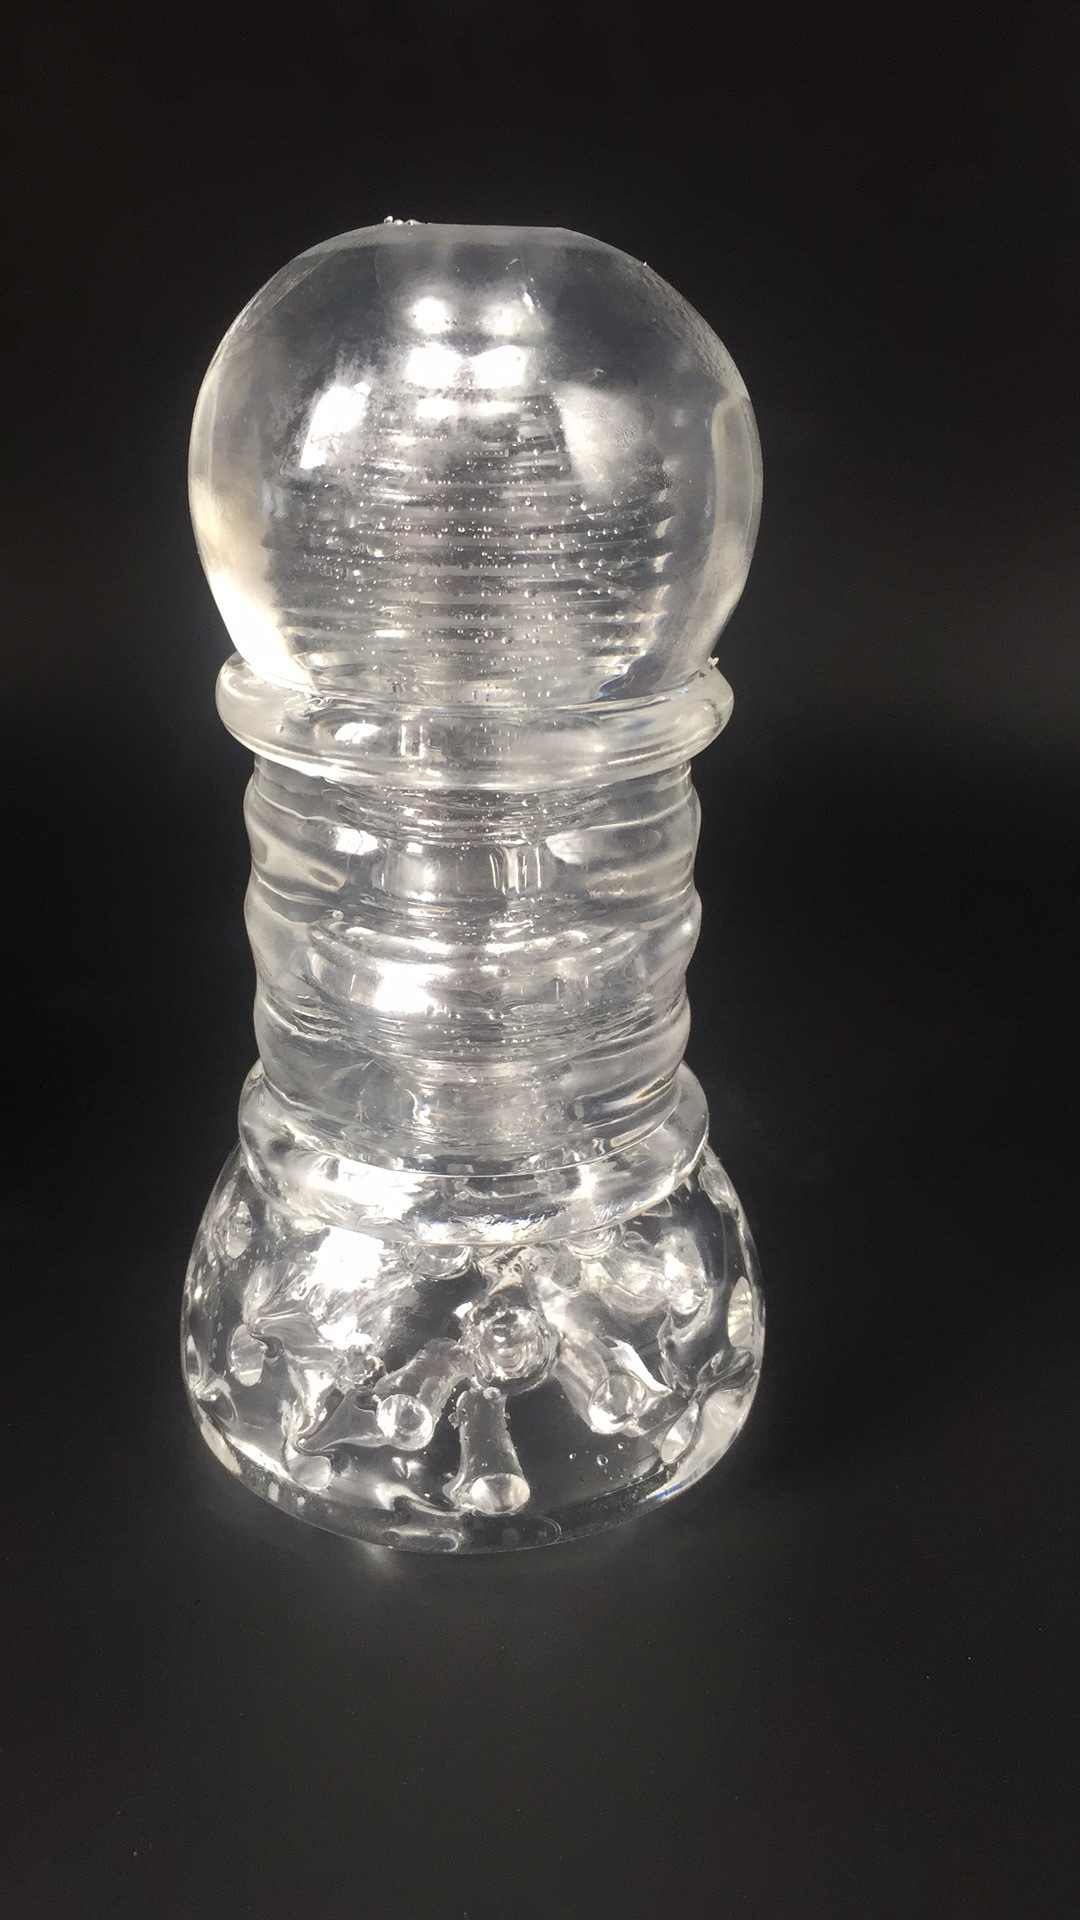 Male Delay Trainer, Masturbation Cup, Transparent Aircraft Cup